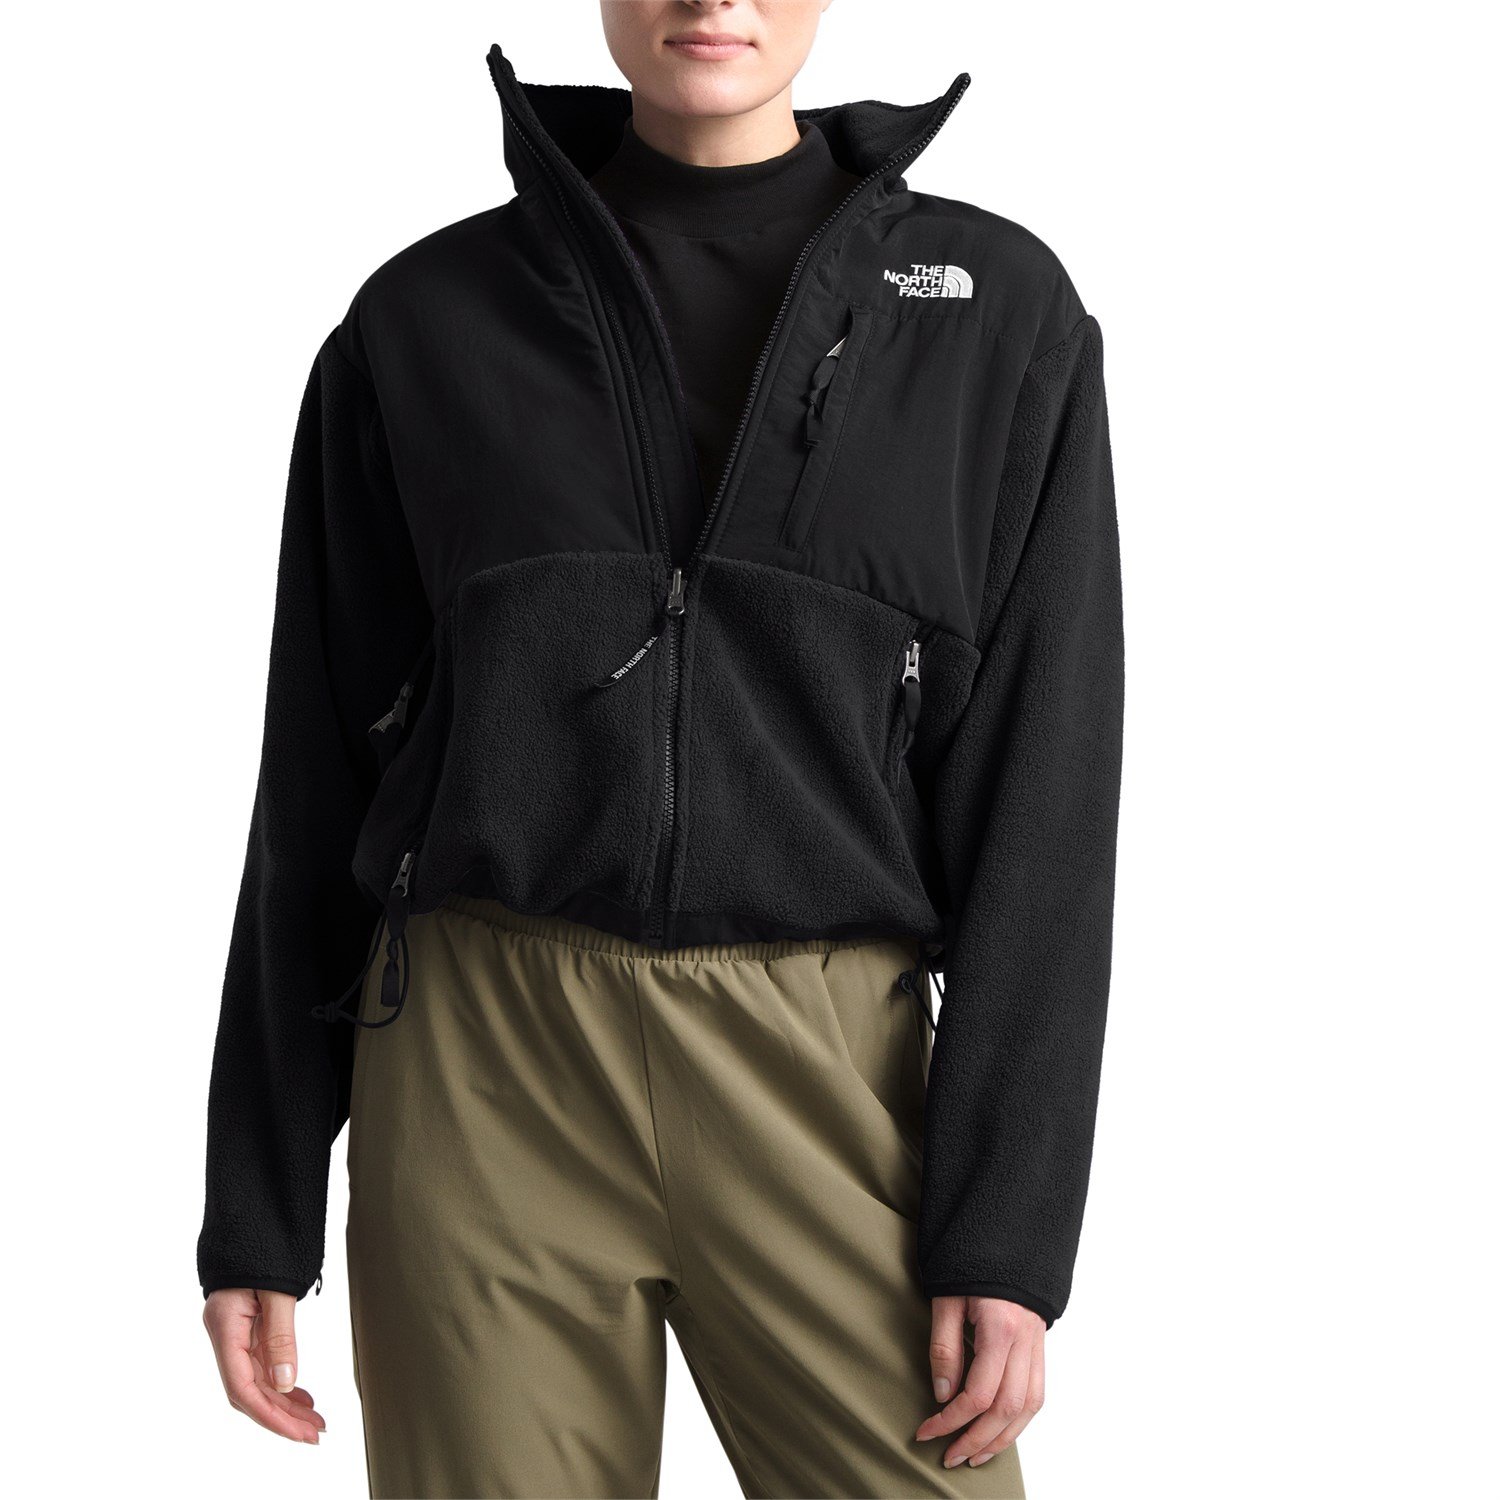 The North Face '95 Retro Denali Jacket Is Its Best yet — Review